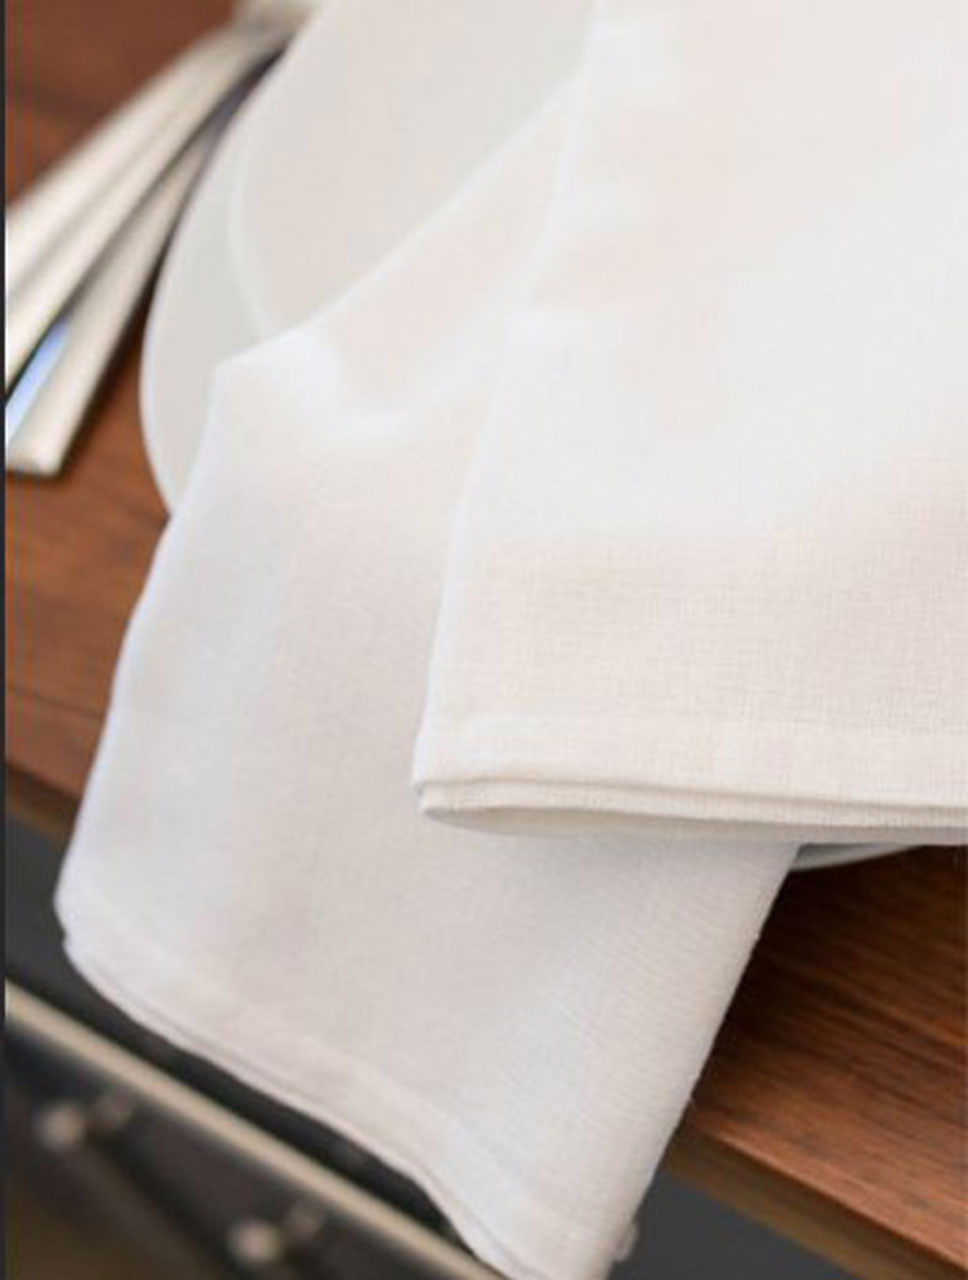 What are the specific specs of the 100% Cotton Huck Towel?